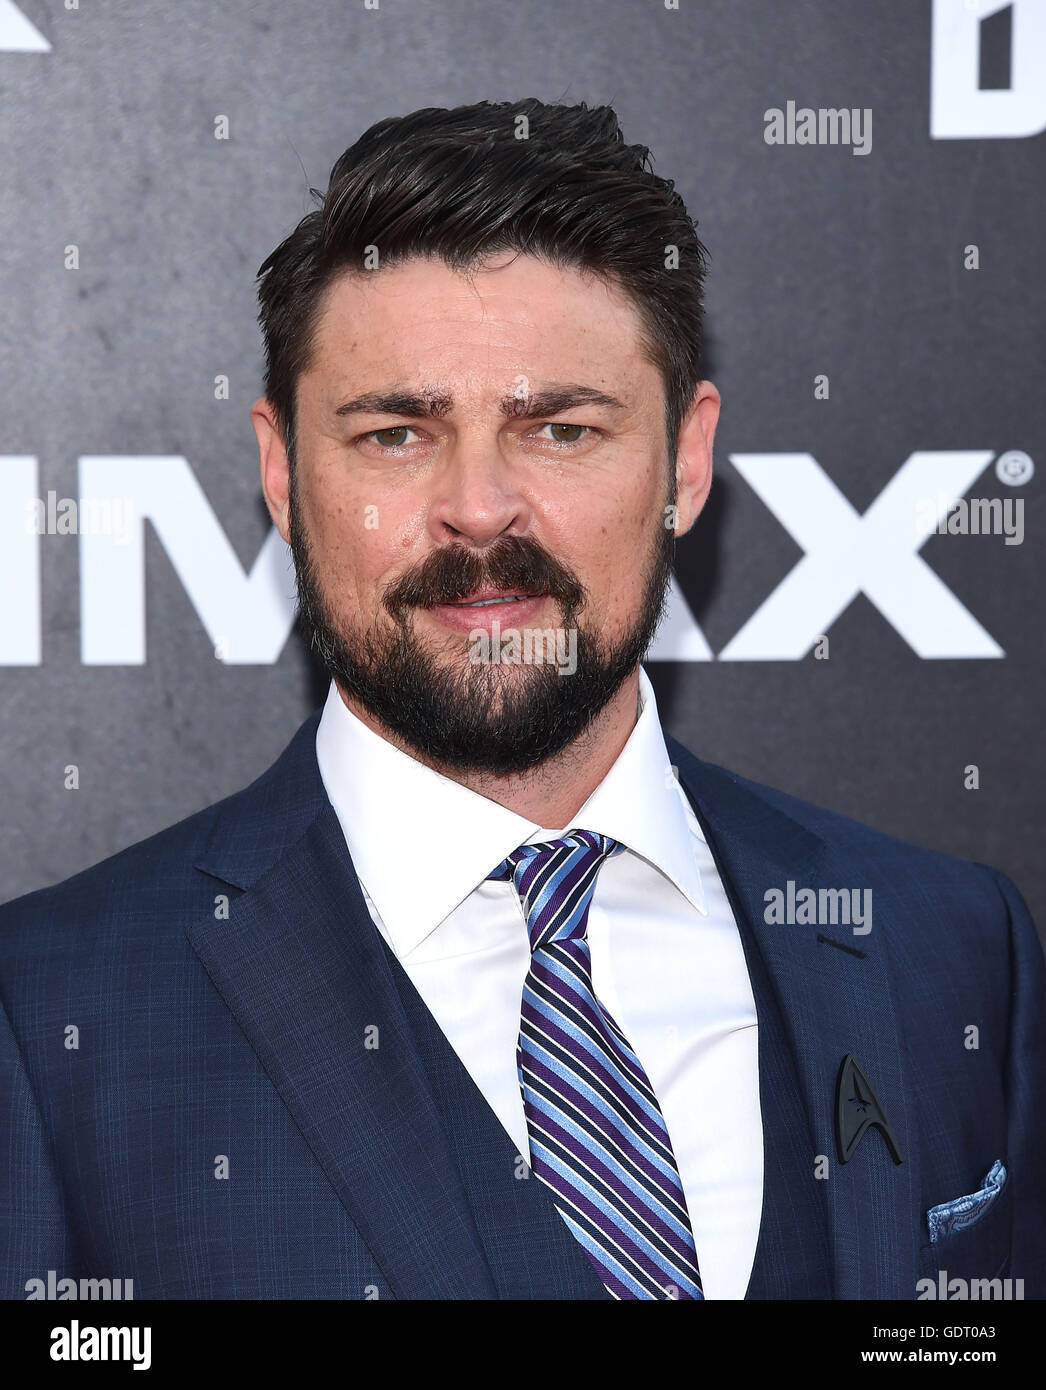 San Diego, California, USA. 20th July, 2016. Karl Urban arrives for the premiere of the film 'Star Trek Beyond' at the Embarcadero Marina Park. Credit:  Lisa O'Connor/ZUMA Wire/Alamy Live News Stock Photo